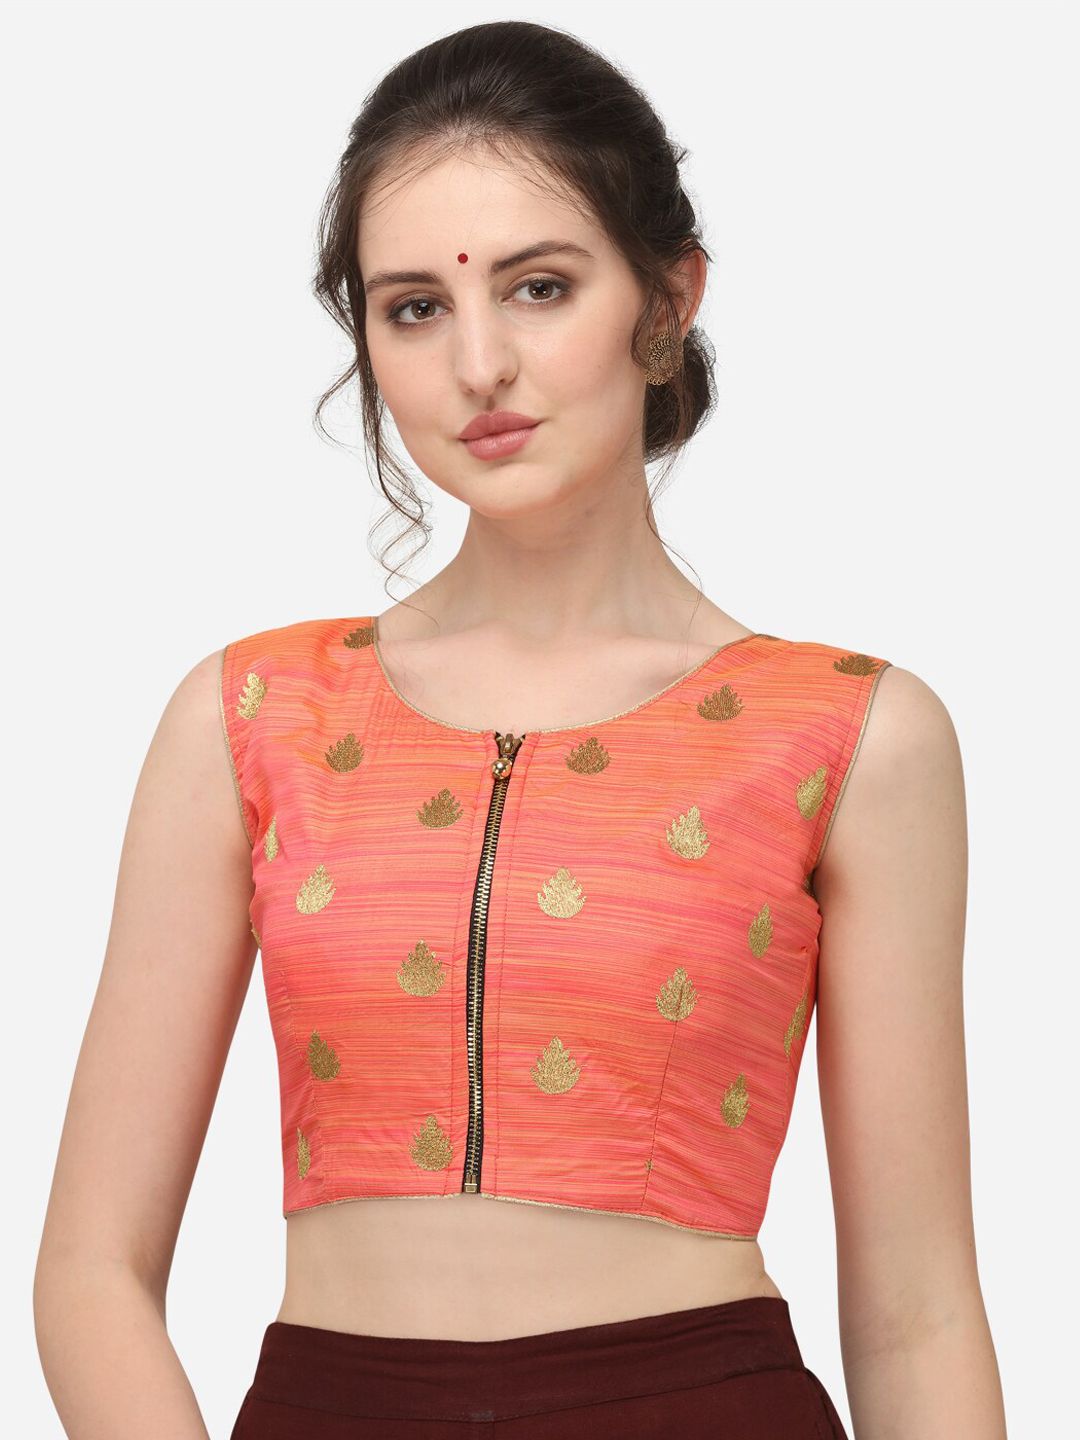 Fab Viva Peach-Coloured & Gold-Coloured Embroidered Saree Blouse Price in India